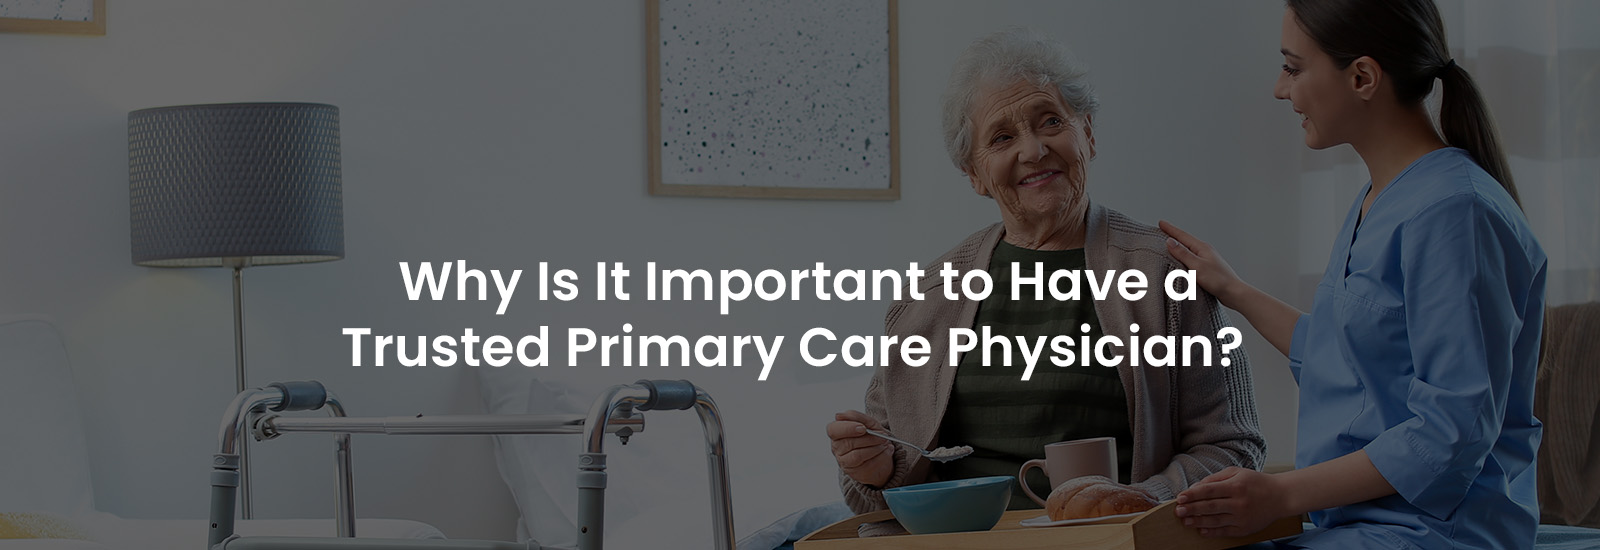 Why is it Important to Have a Trusted Primary Care Physician? | Banner Image